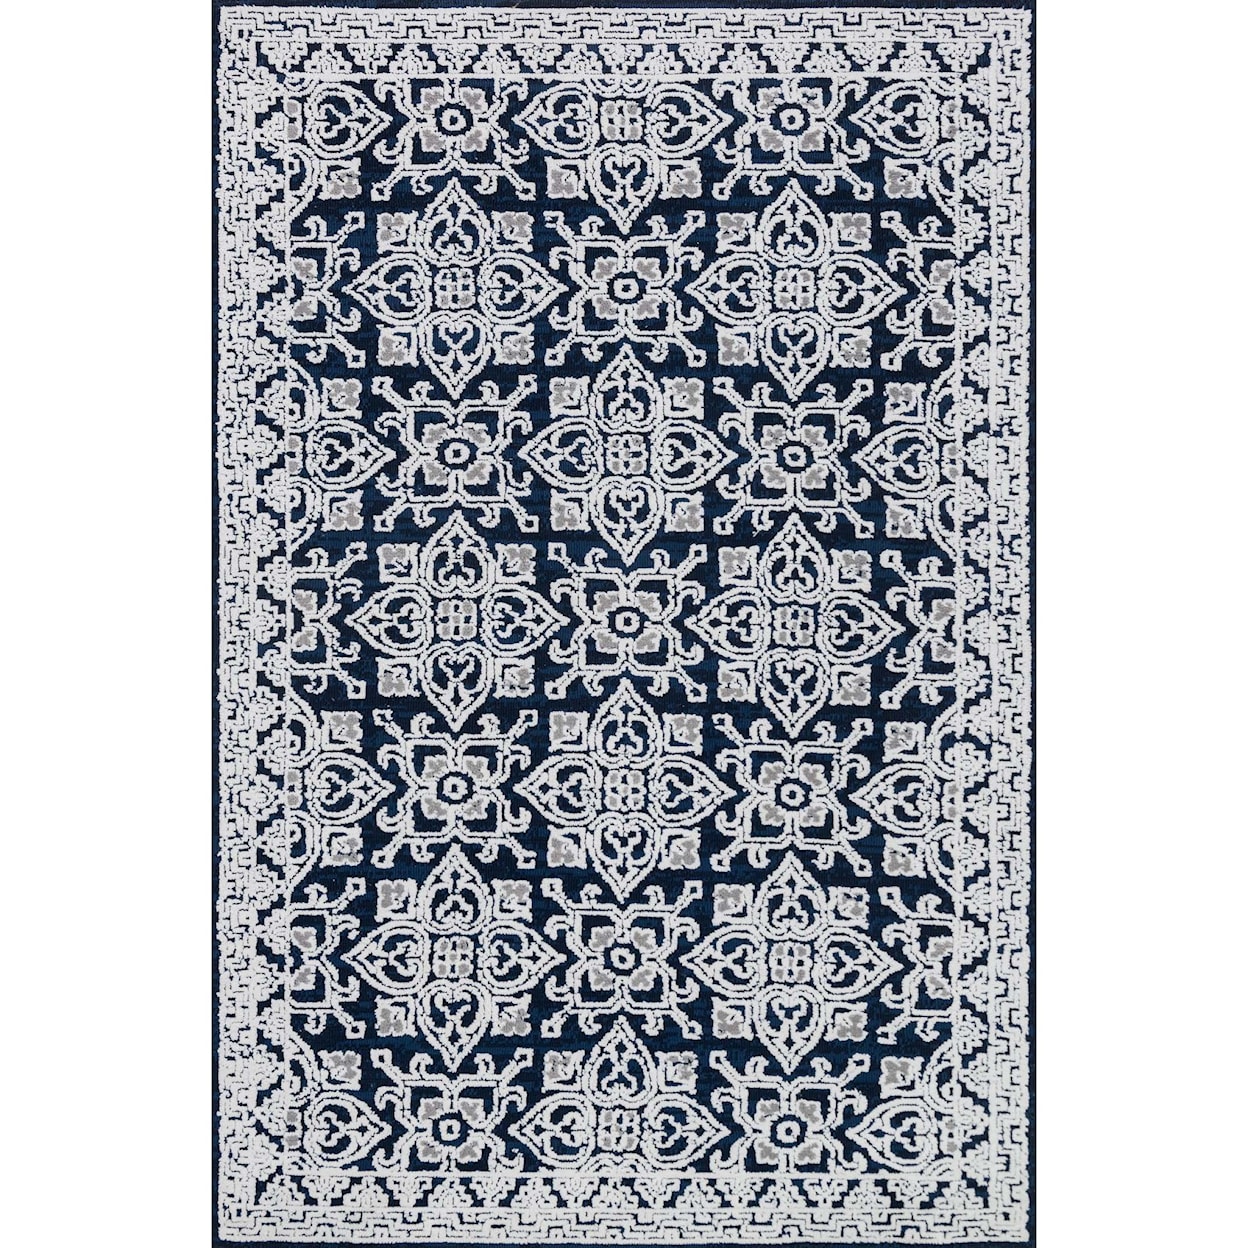 Magnolia Home by Joanna Gaines for Loloi Lotus 5' 0" x 7' 6" Rectangle Rug